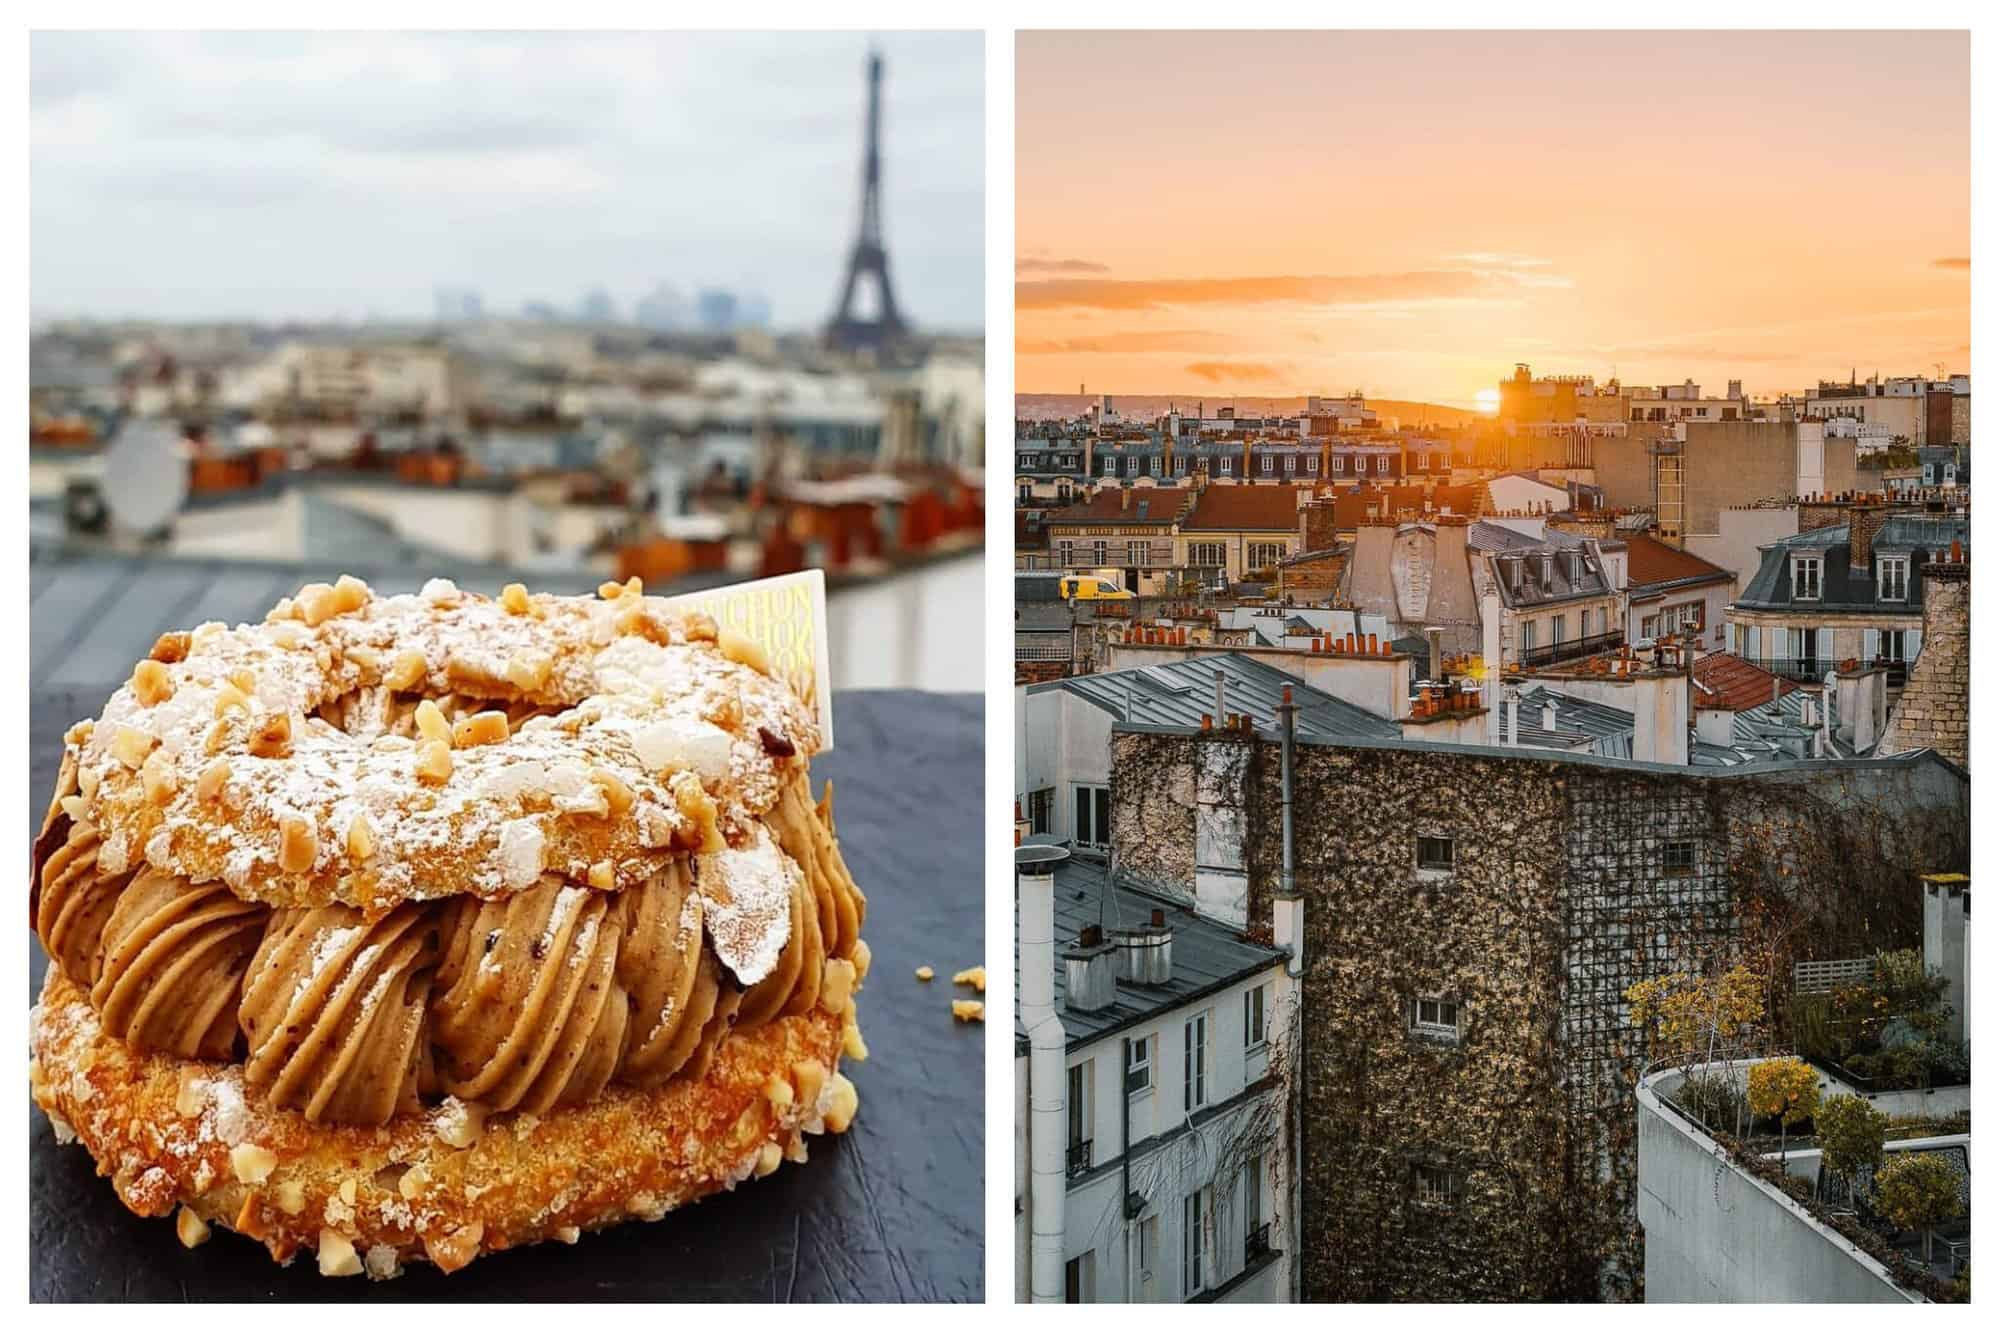 Left: The french dessert Paris-Brest is beautifully captured with the Eiffel Tower in the background. Right: The Parisian rooftops at sunset, with the golden sky in the background.